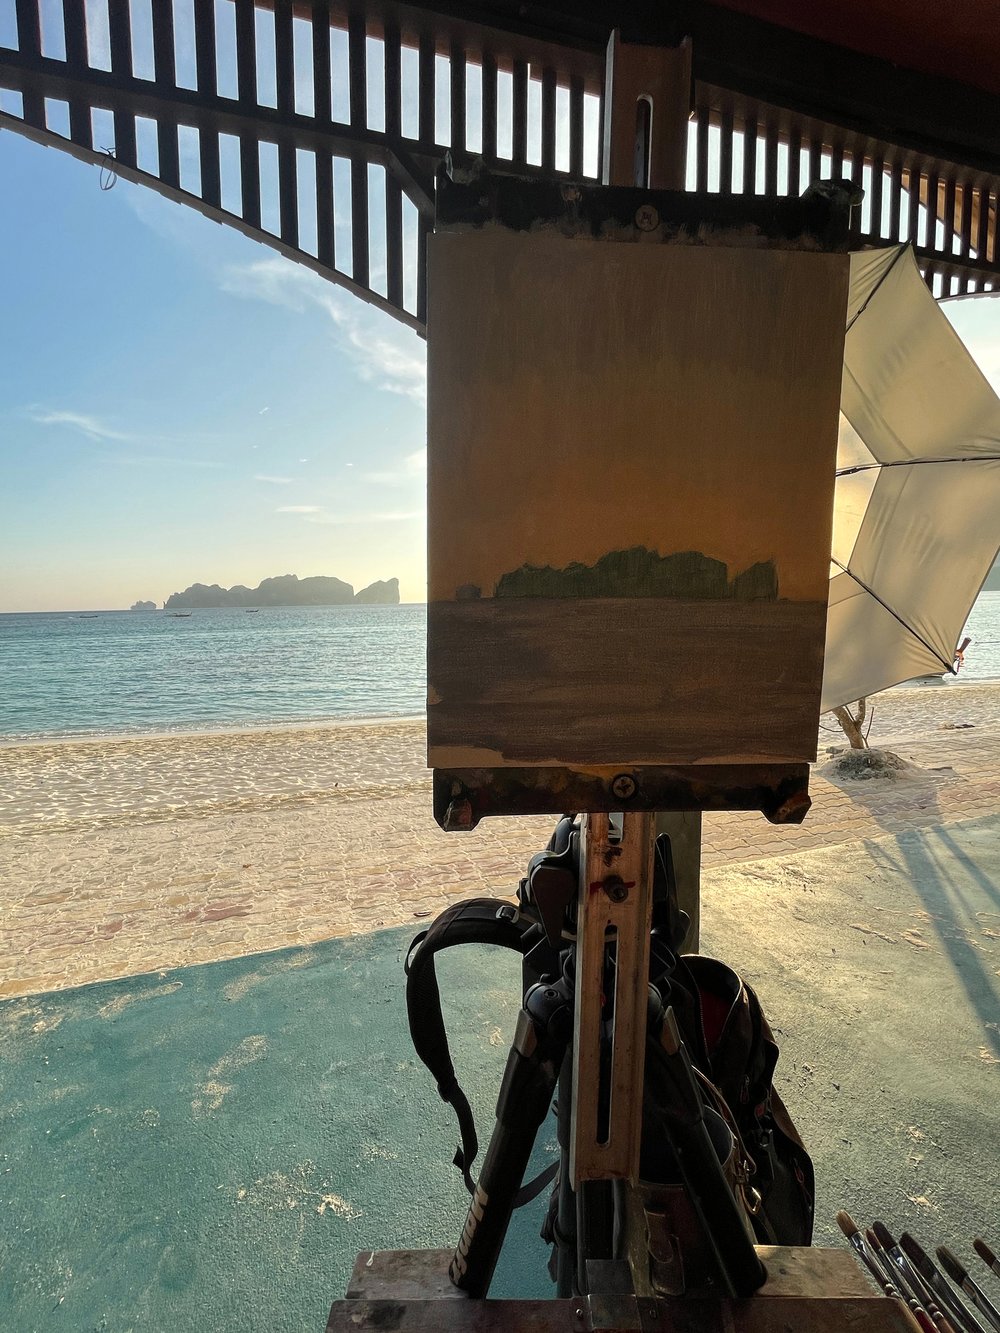 My last sketch of the trip: late afternoon view of Koh Phi Leh